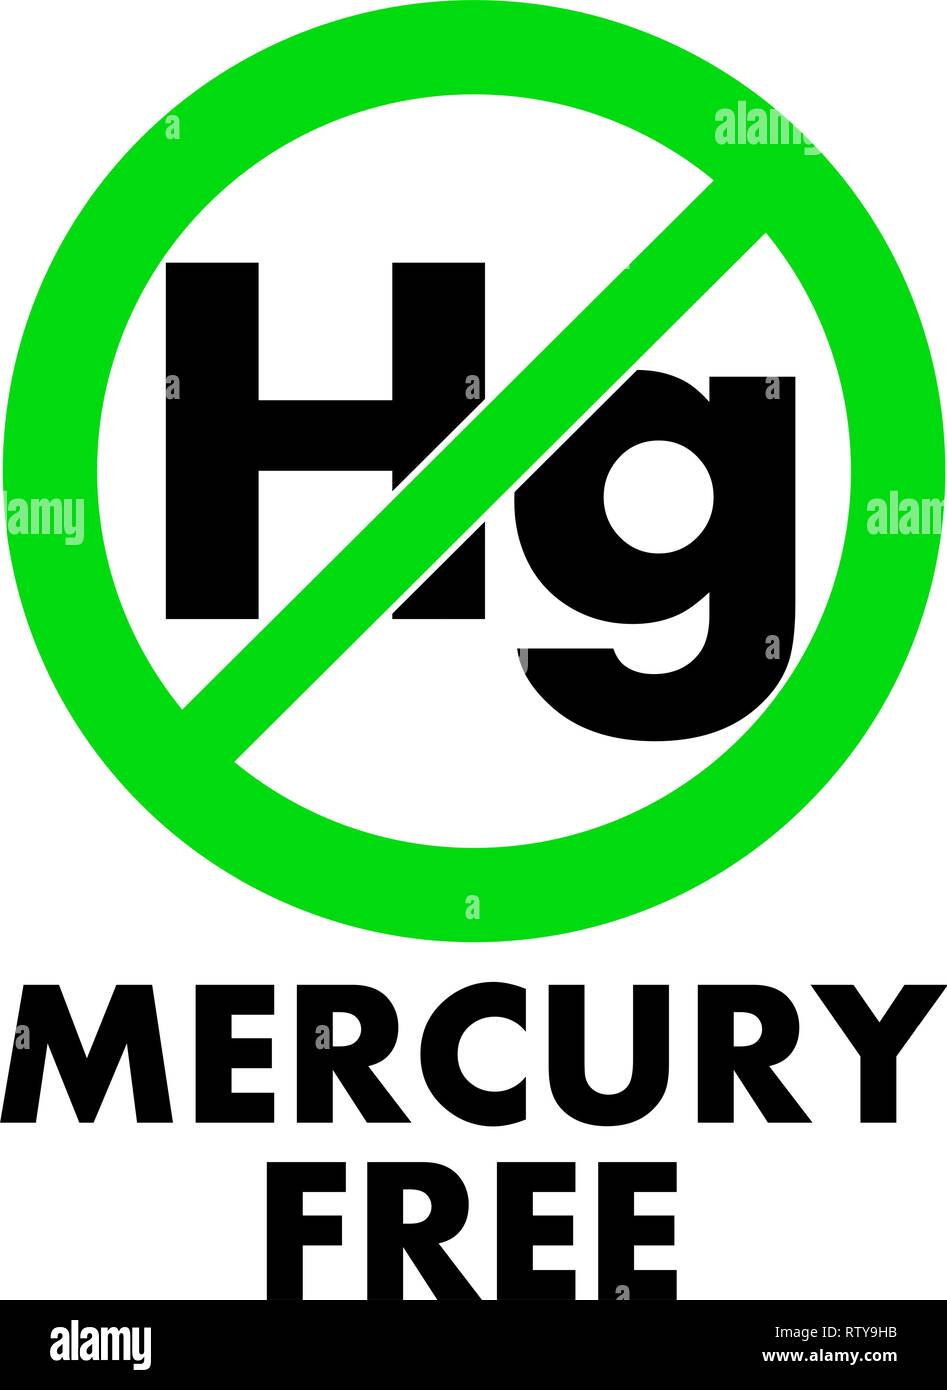 Mercury free icon. Letters Hg (chemical symbol) in green crossed circle, with text under. Stock Vector